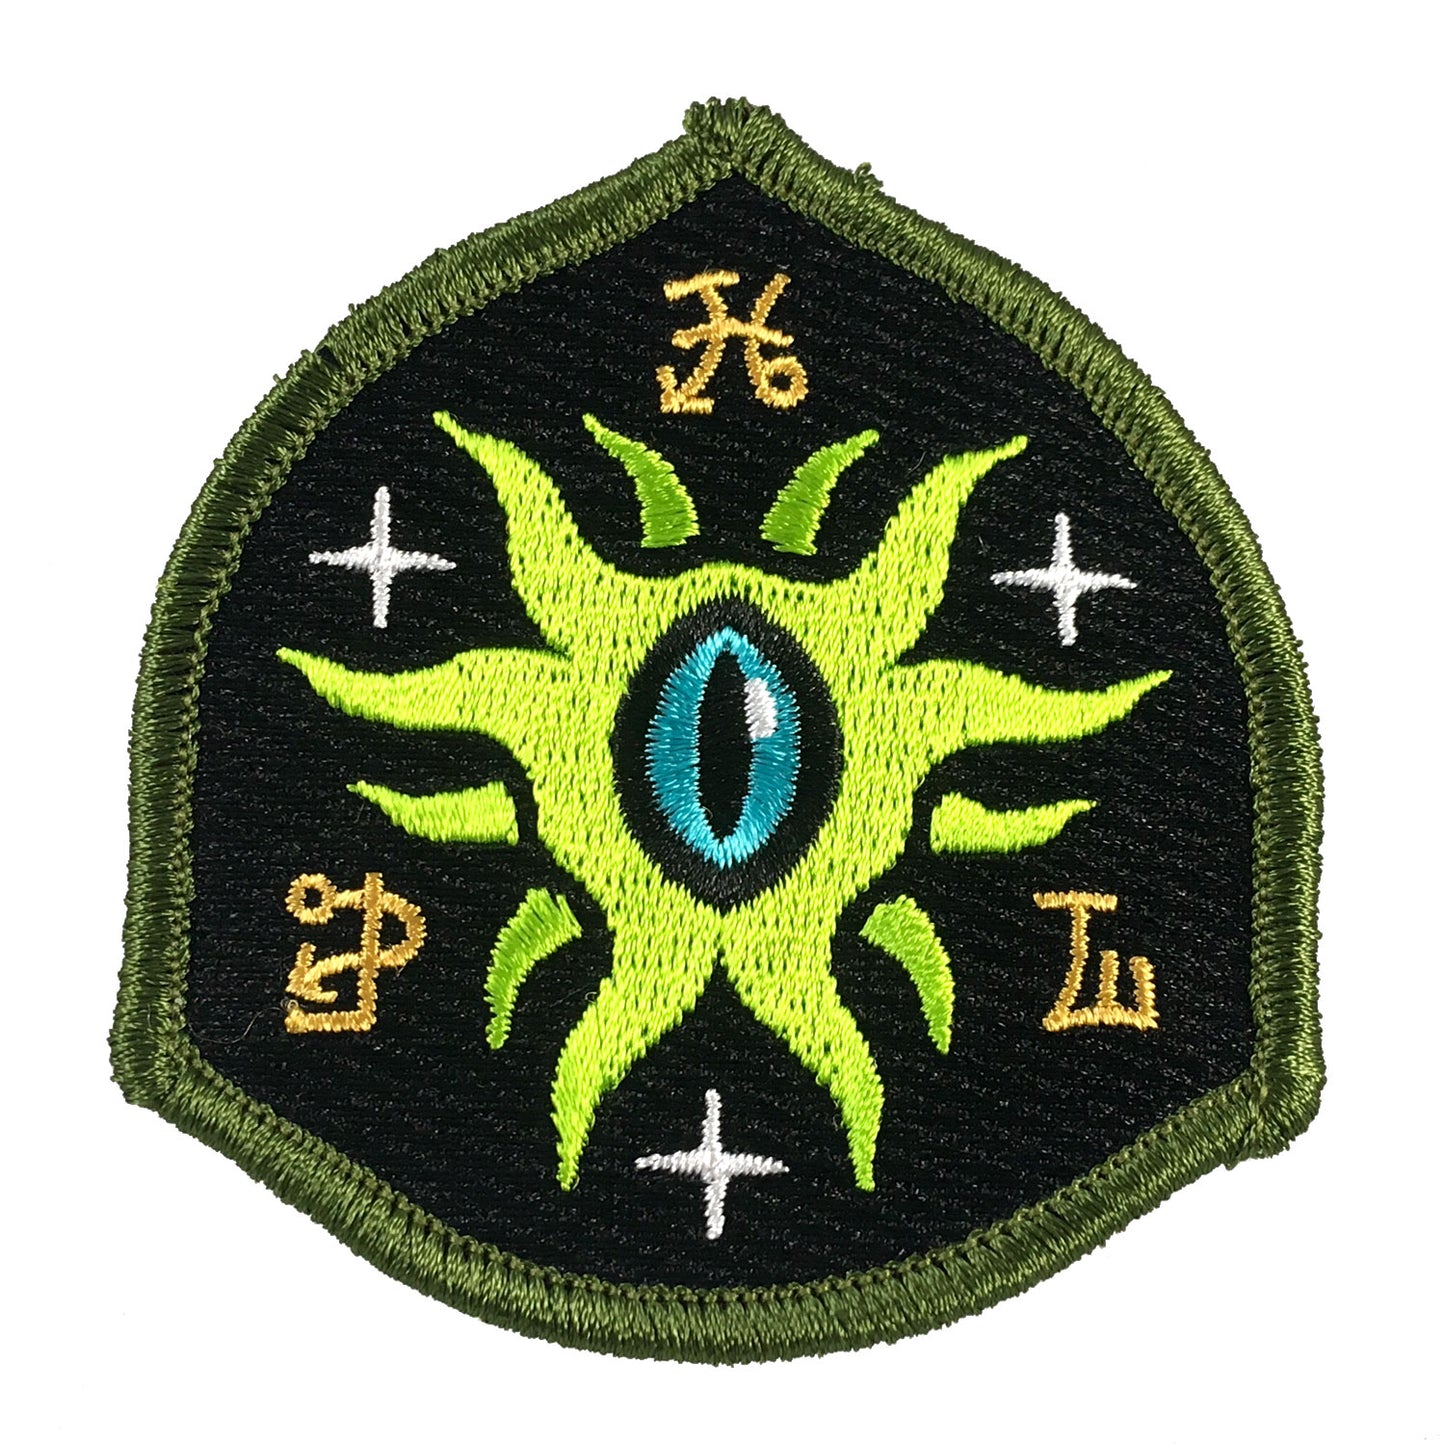 Eye Of Shoggoth embroidered patch by Monsterologist